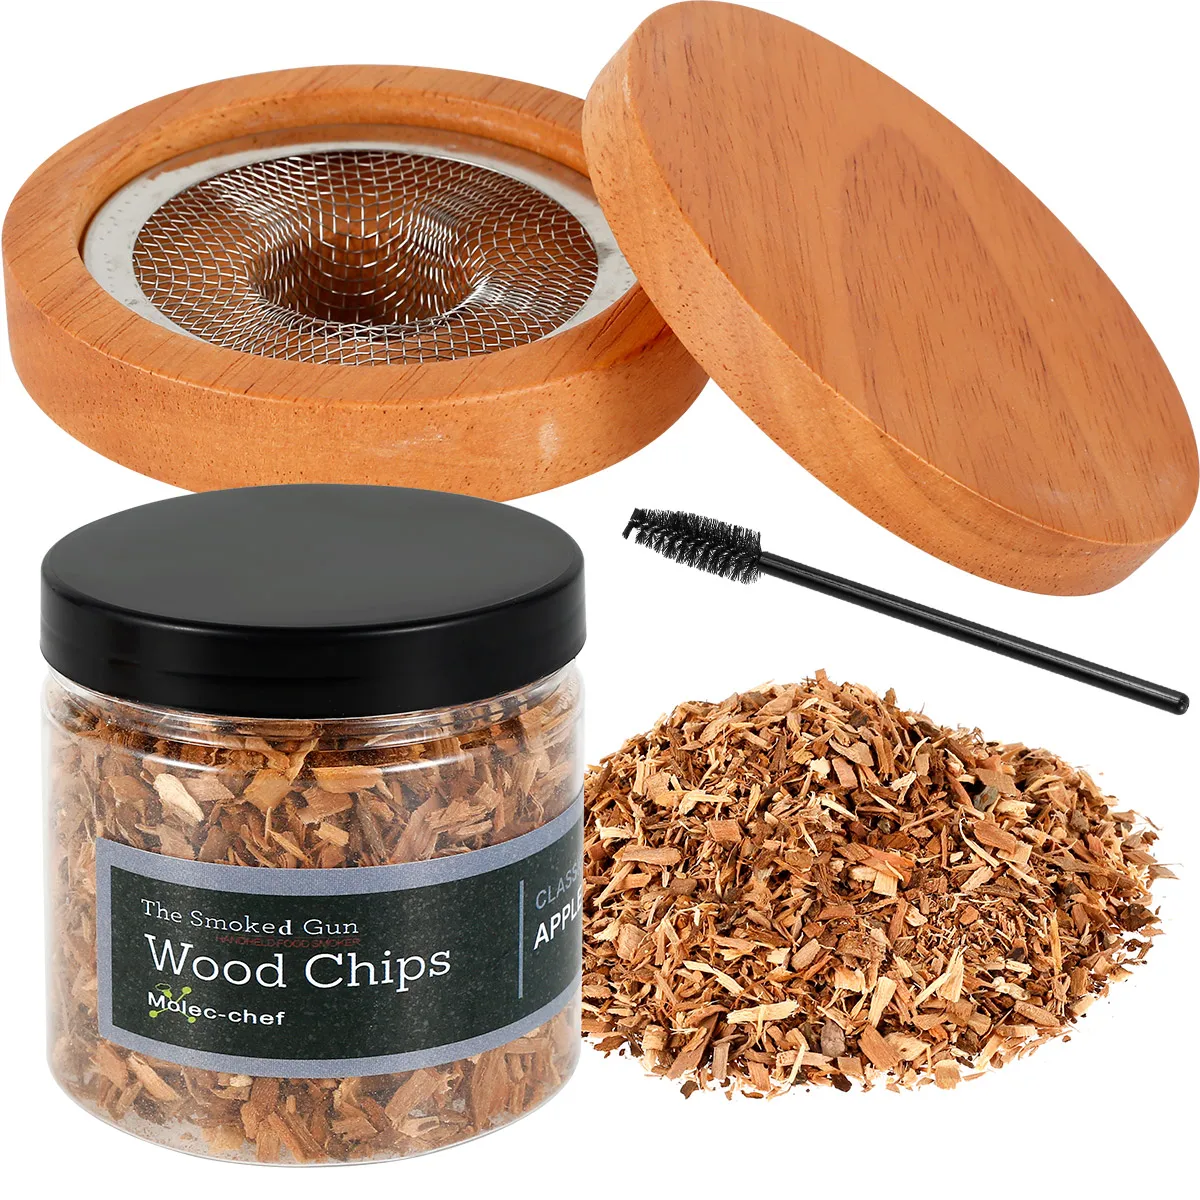 

Cocktail Smoker Smoked Cocktail Kit with Wood Chips Smoke Infuse Cocktails Wine Whiskey Cheese Meat Coffee Salt Father Gift